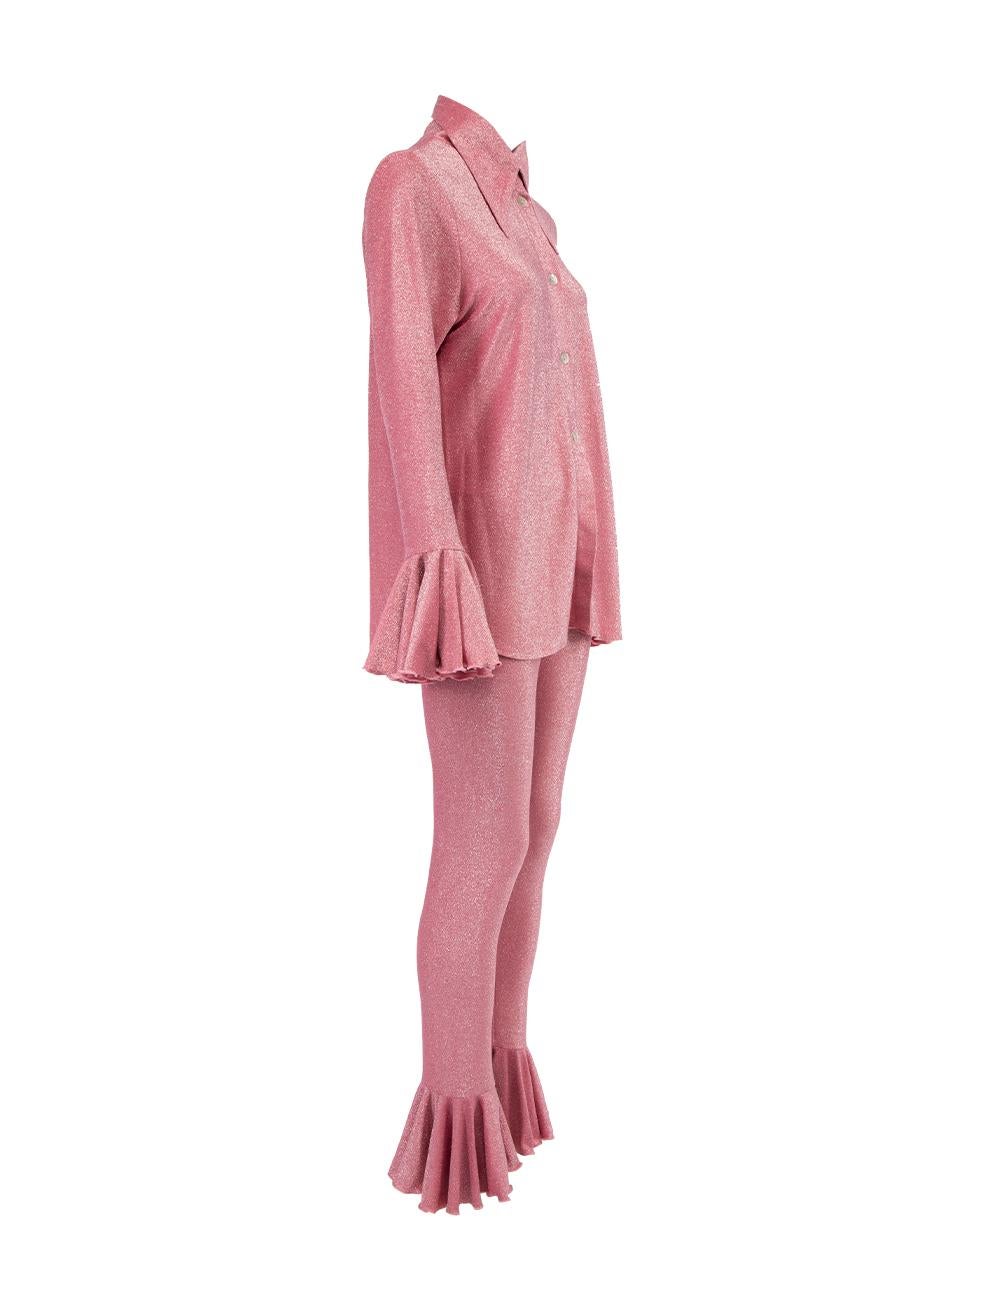 CONDITION is Never worn, with tags. No visible wear to pyjama et is evident on this new Sleeper designer resale item. Details Cherry pink Synthetic Shimmery pyjamas set Cardigan with flared ruffles cuff Front button closure Tight fitted trouser with